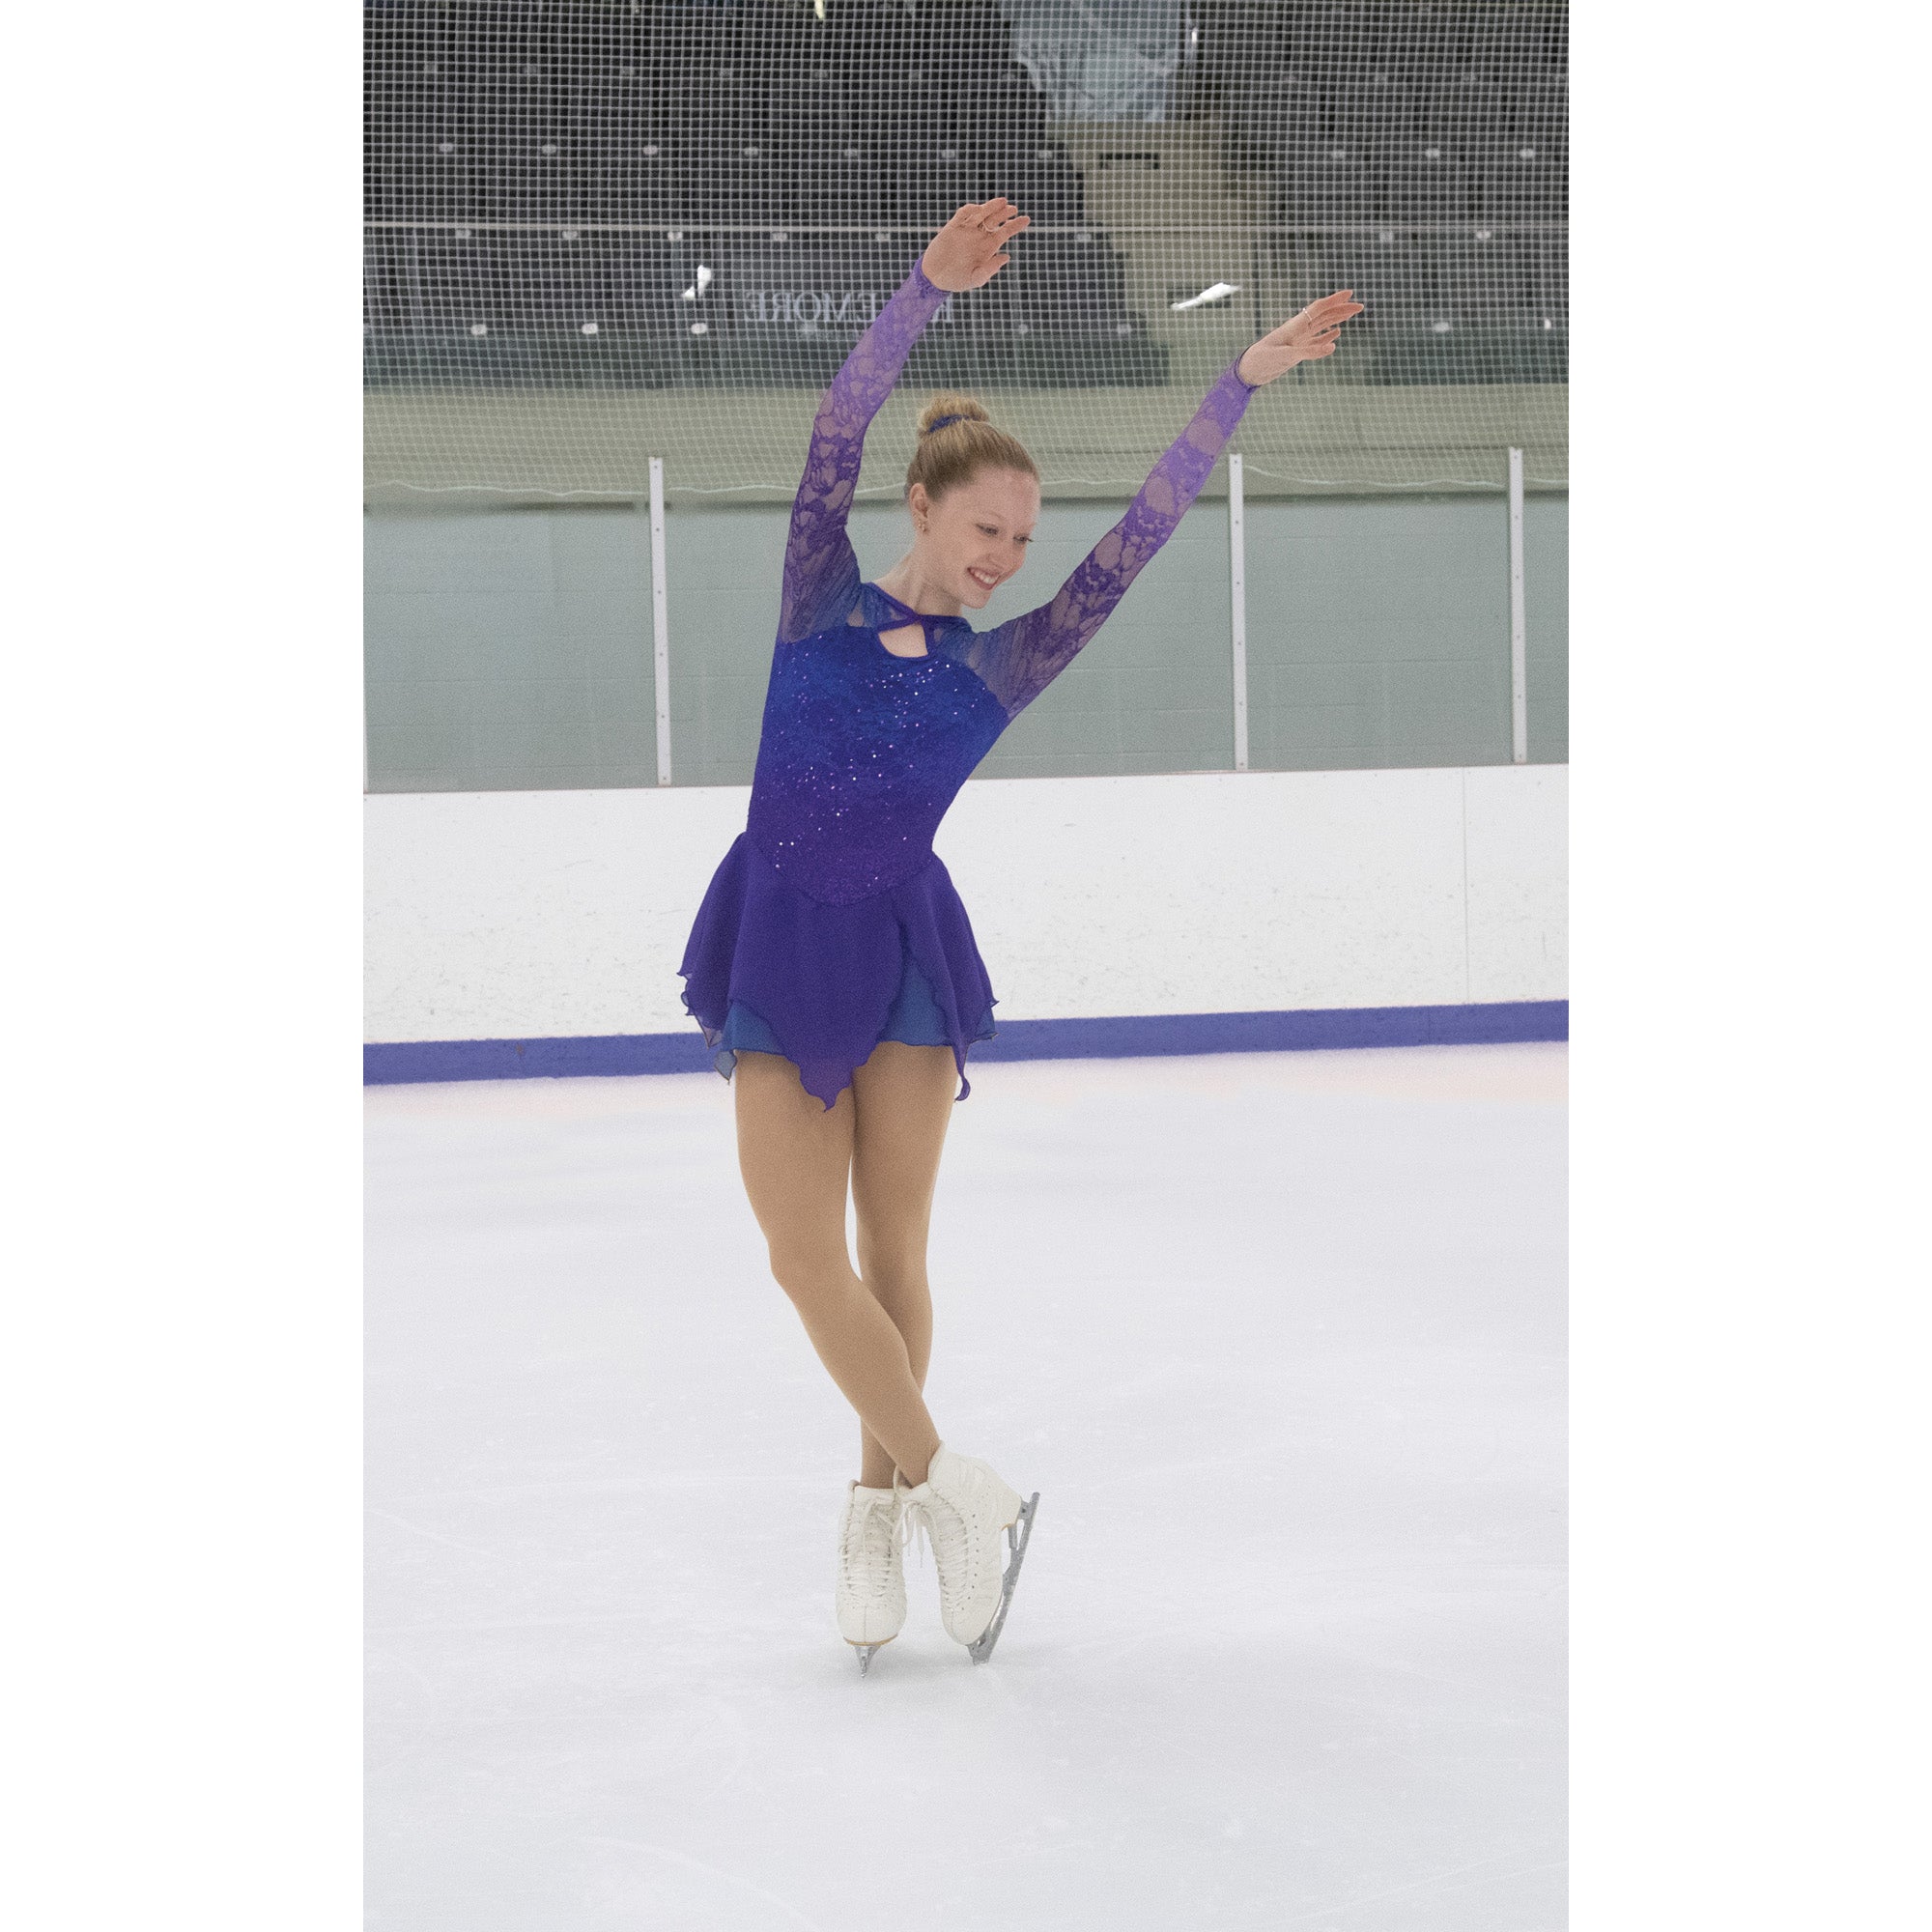 IceDress Figure Skating Dress-Thermal - Snowflake (25% OFF, Mint and White)